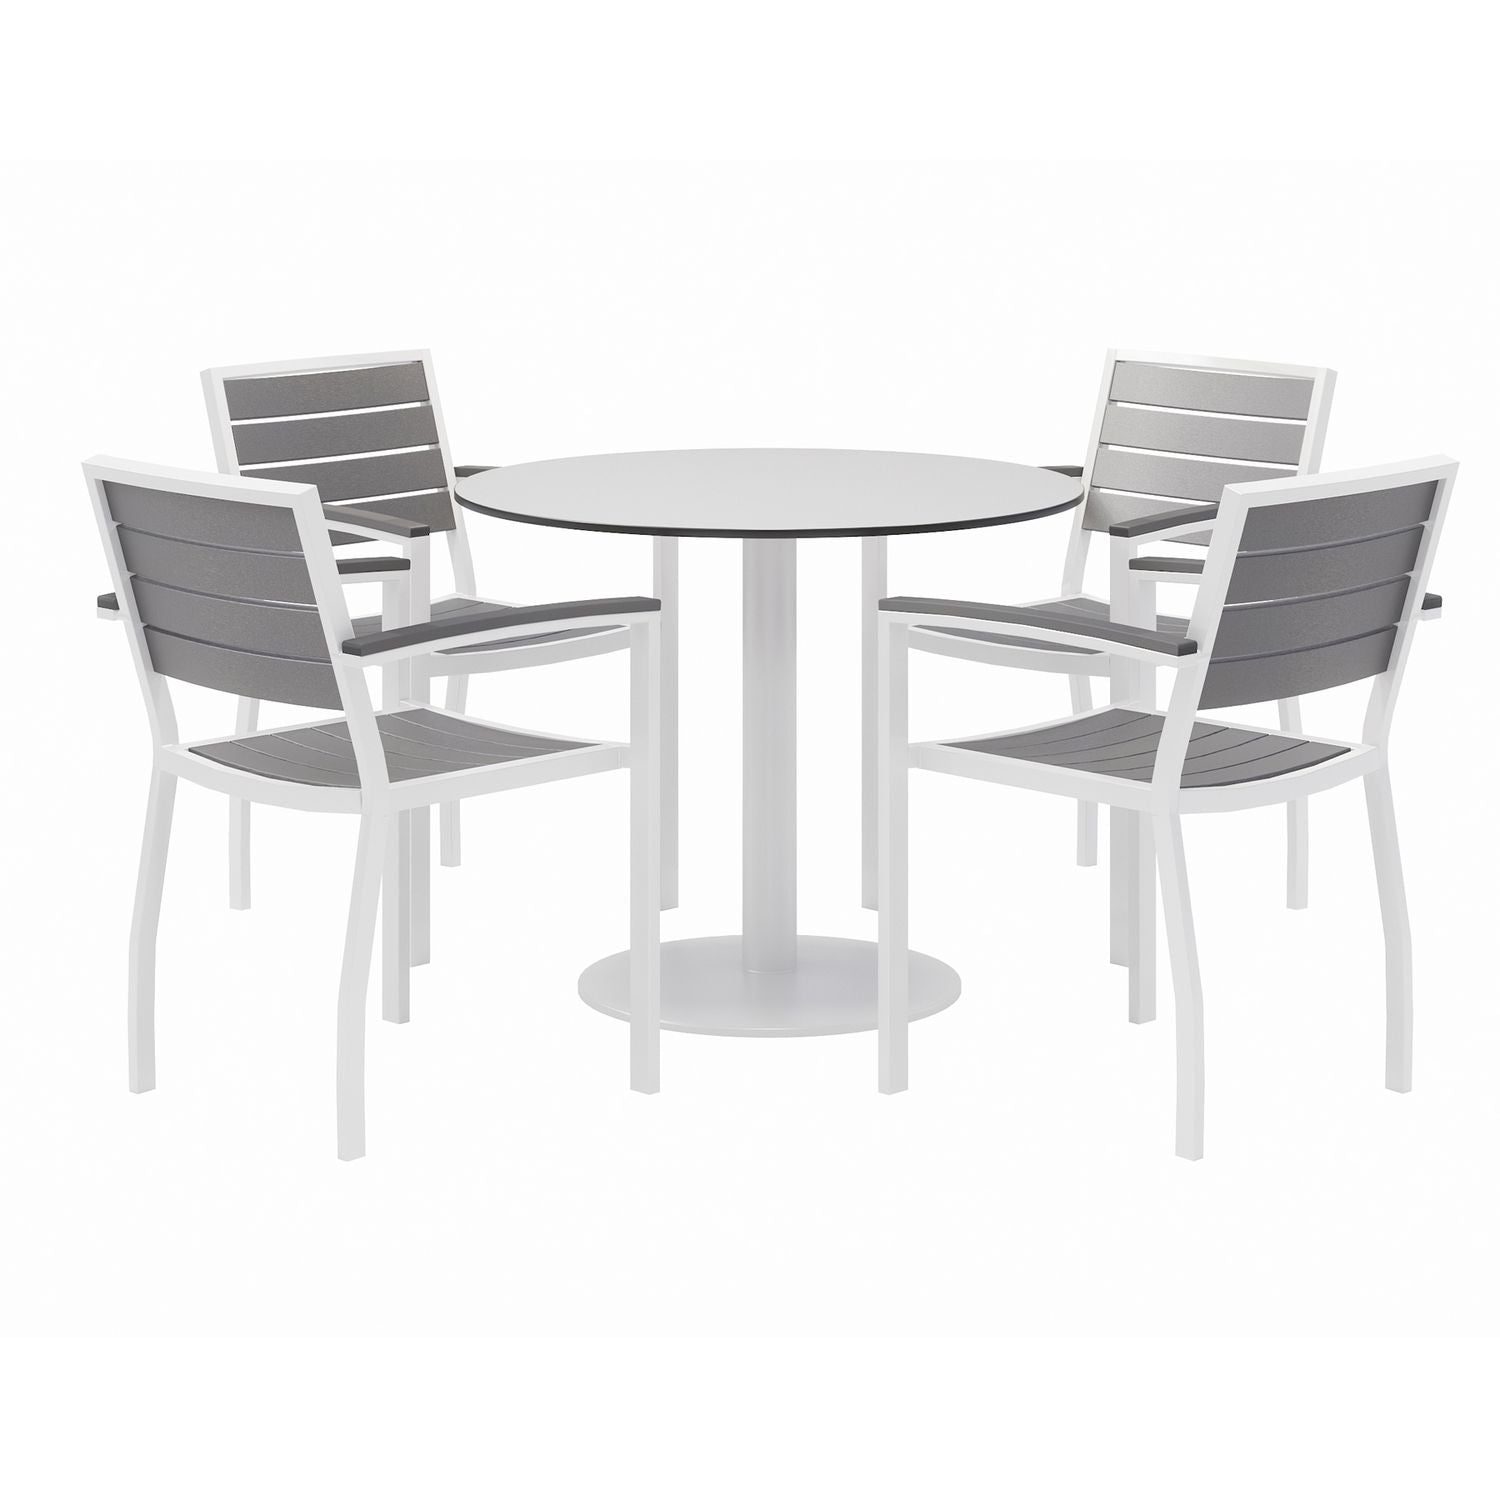 eveleen-outdoor-patio-table-w-four-gray-powder-coated-polymer-chairs-round-36-dia-x-29hwhite-ships-in-4-6-business-days_kfi840031918499 - 1